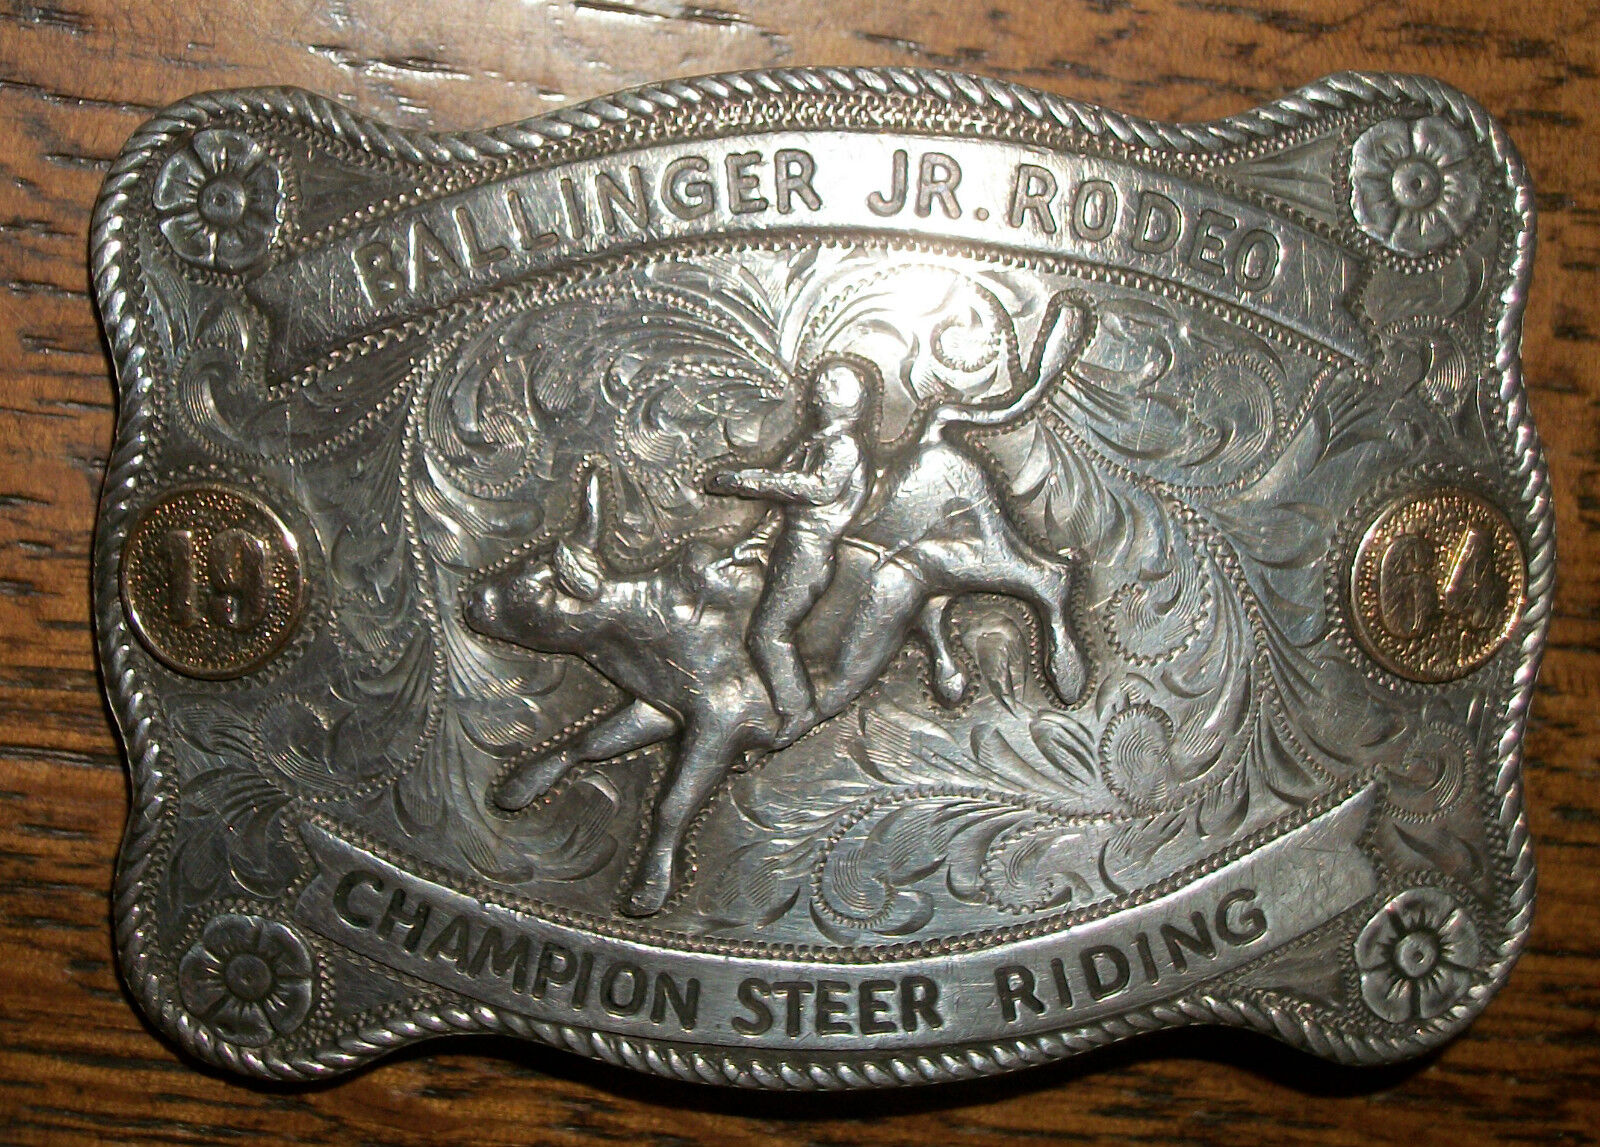 Nelson Silvia Co. Sterling Silver & 10K Belt Buckle~1964 Champion Steer Riding